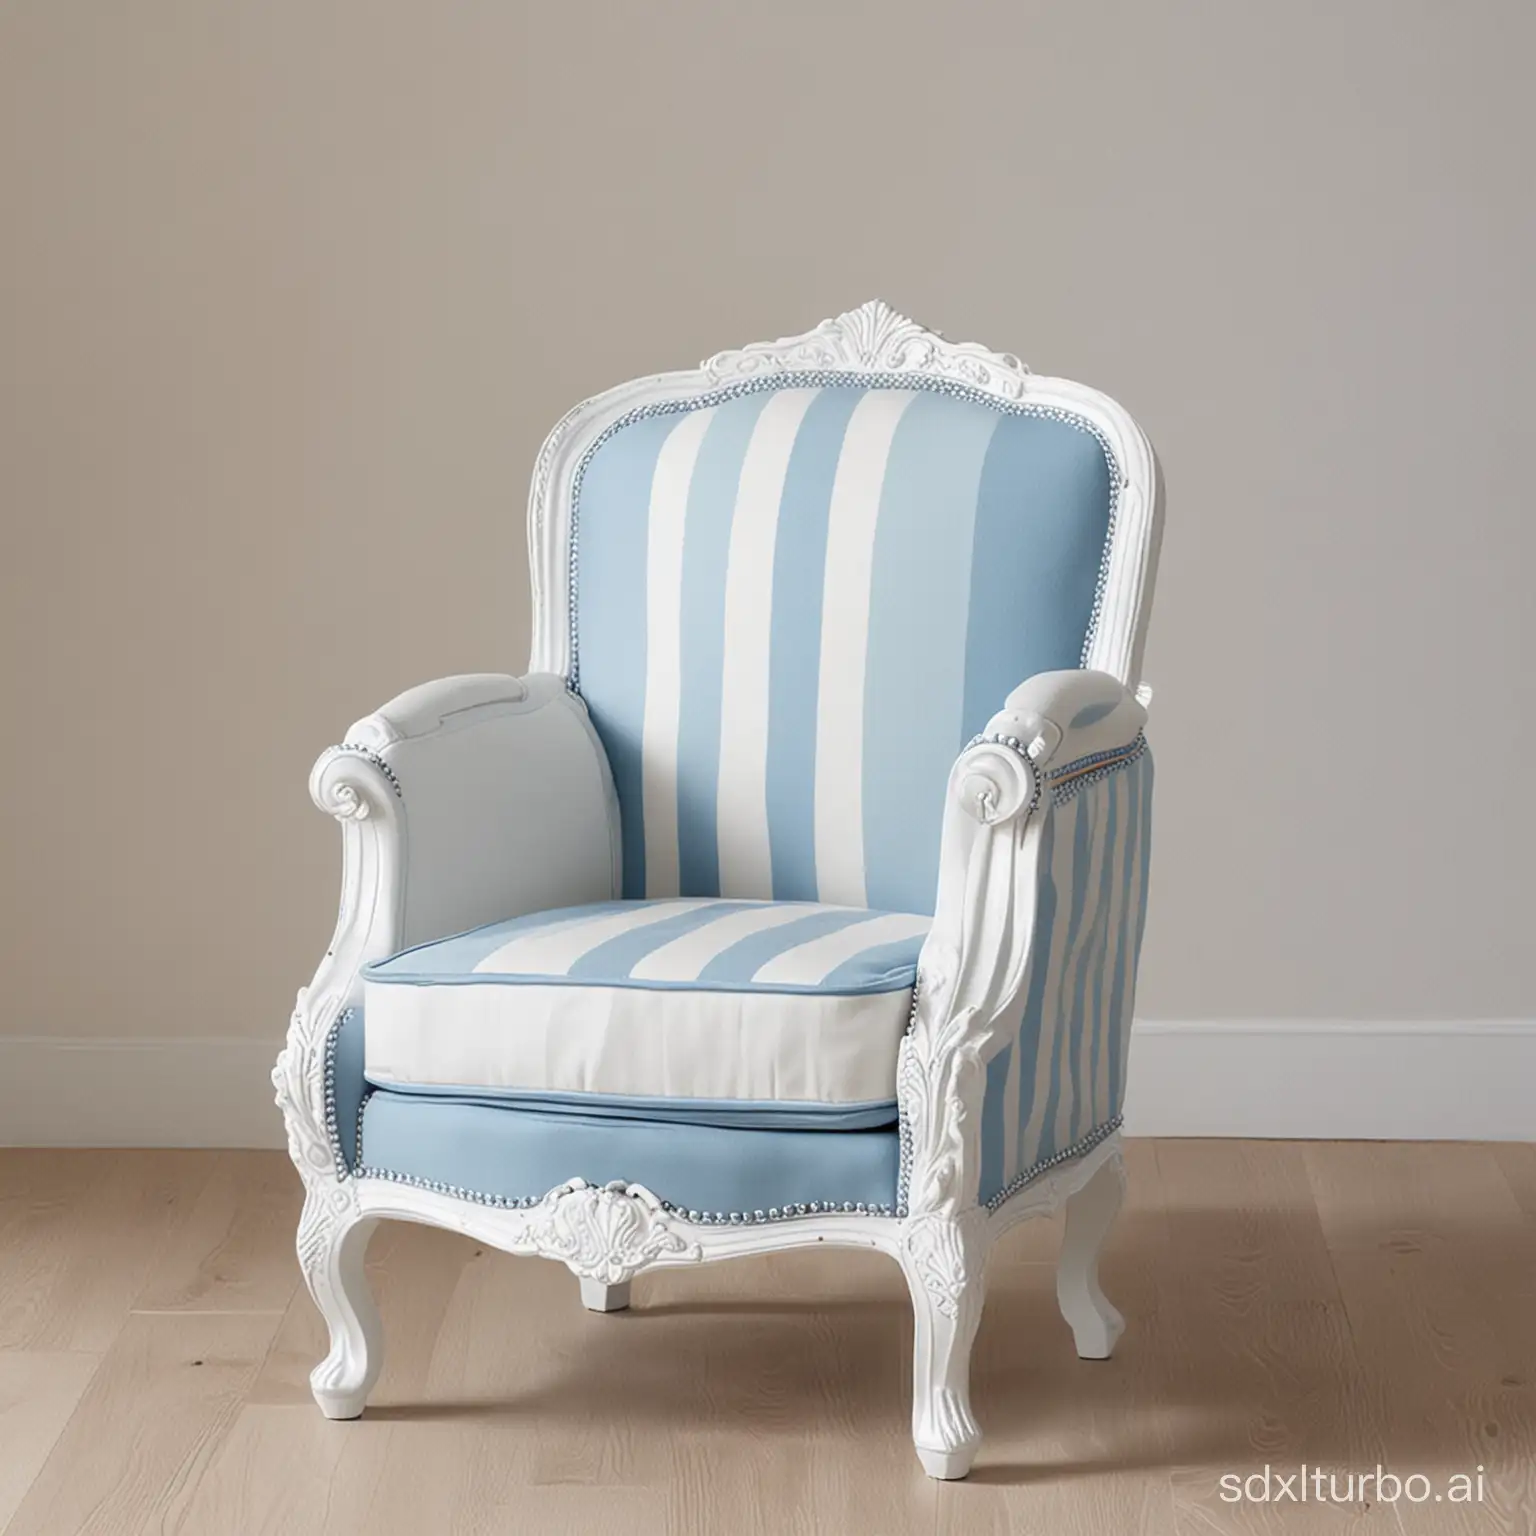 A cute chair for children, blue and white, elegant